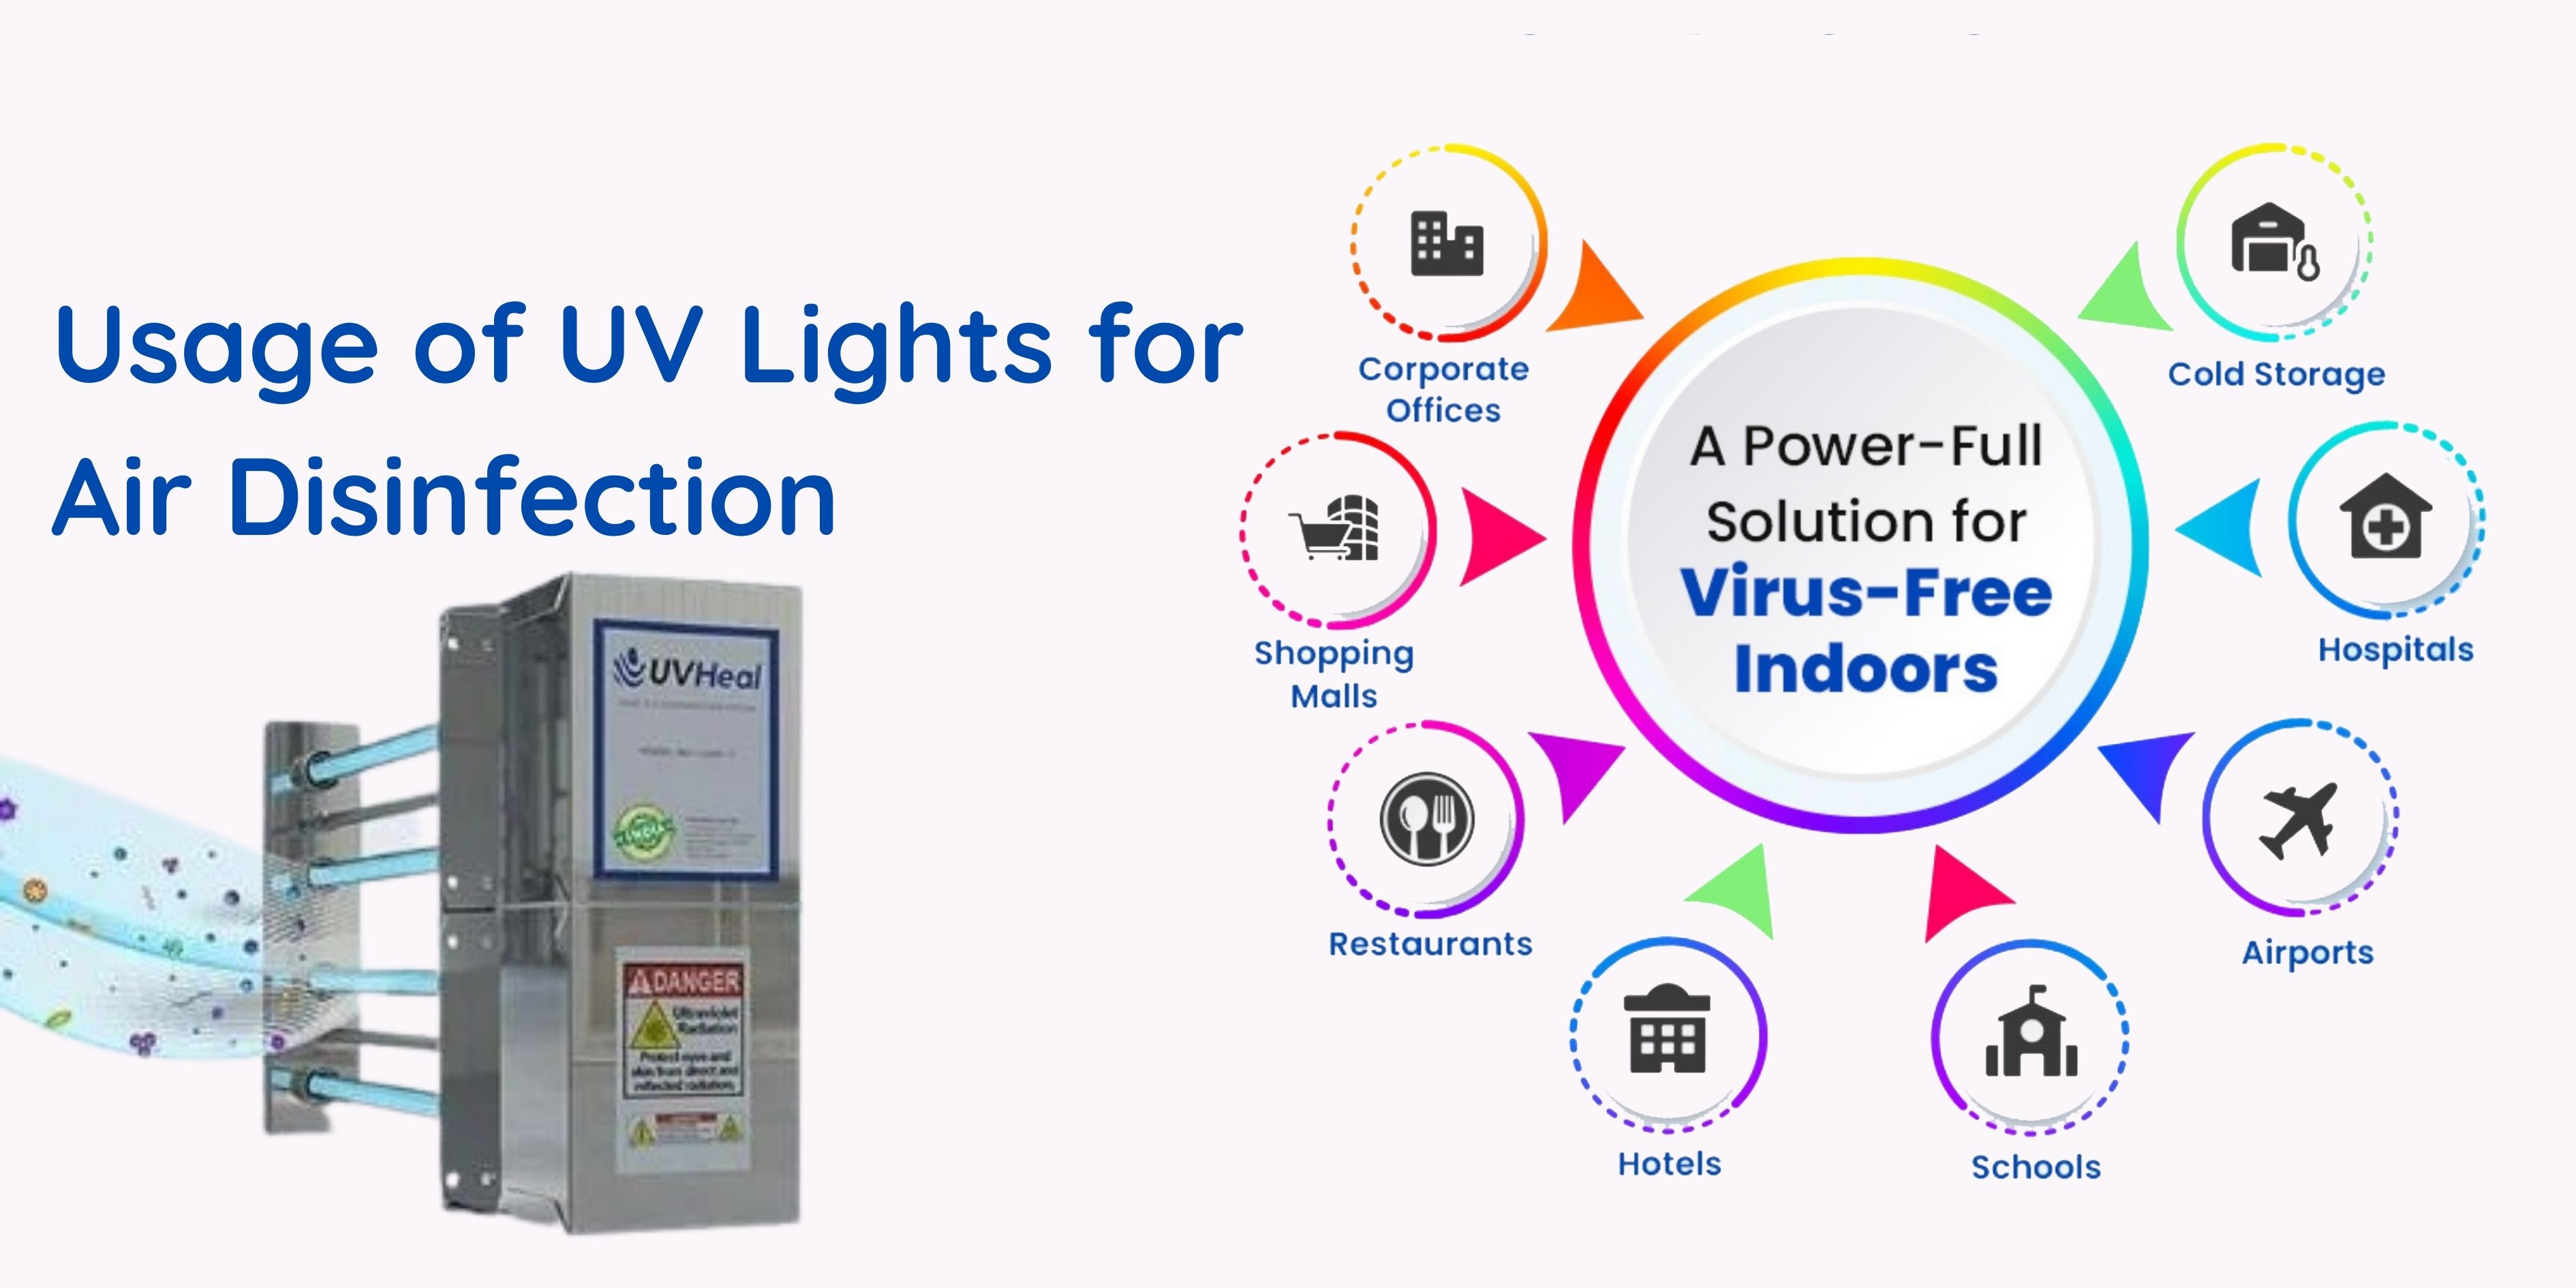 Usage of UV Lights for Air Disinfection - UVGI System for HVAC